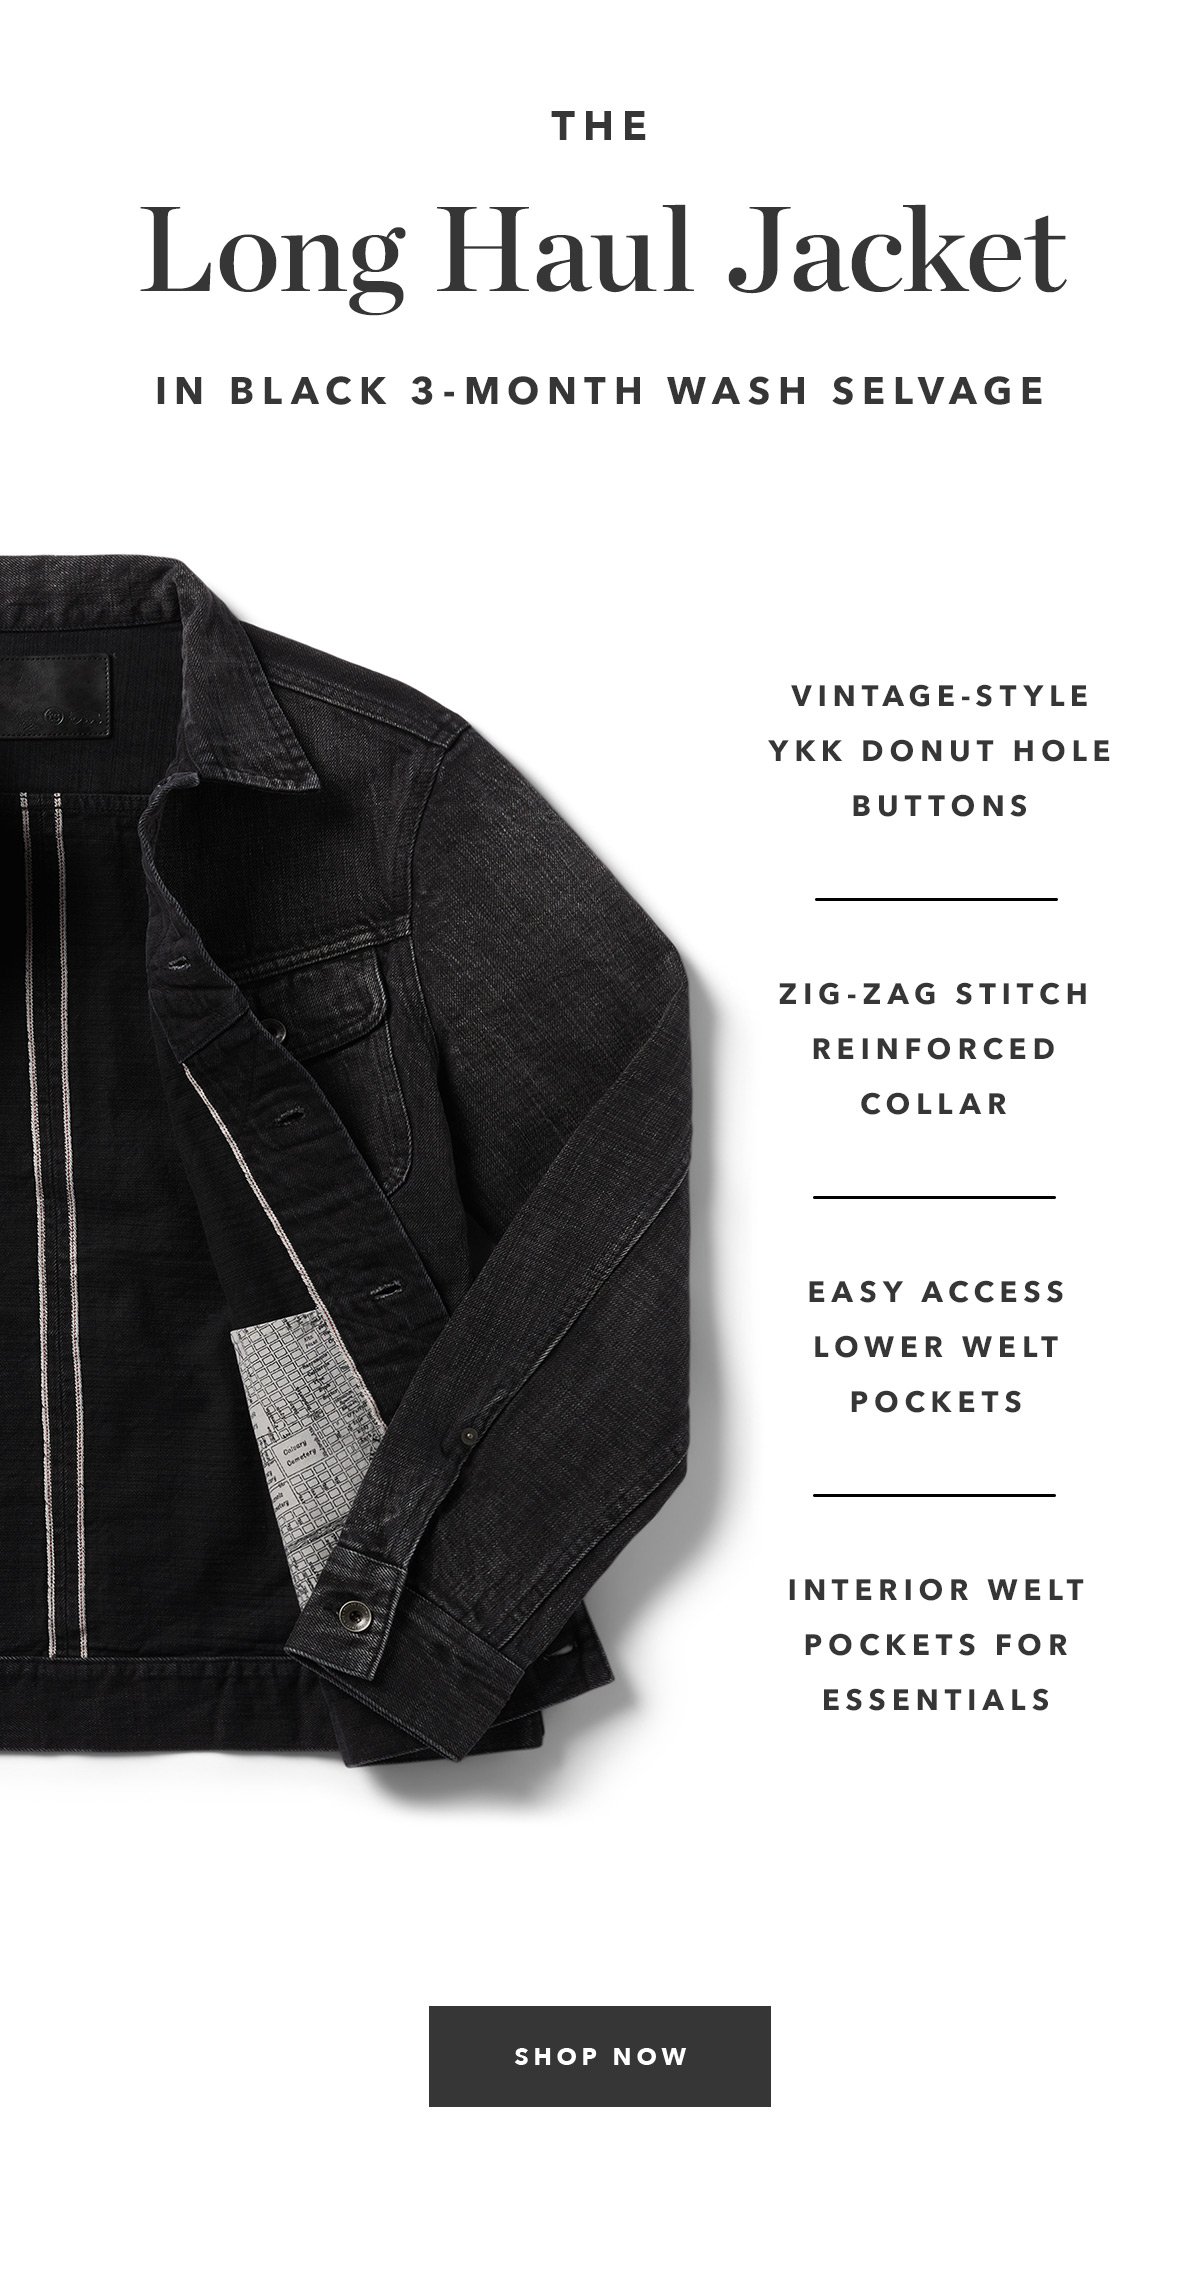 The Long Haul Jacket in Black 3-Month Wash Selvage:Vintage-style YKK donut hole buttons. Signature zig-zag stitch reinforced collar. Slanted lower welt pockets for easy access.  Two Interior welt pockets for storing essentials.